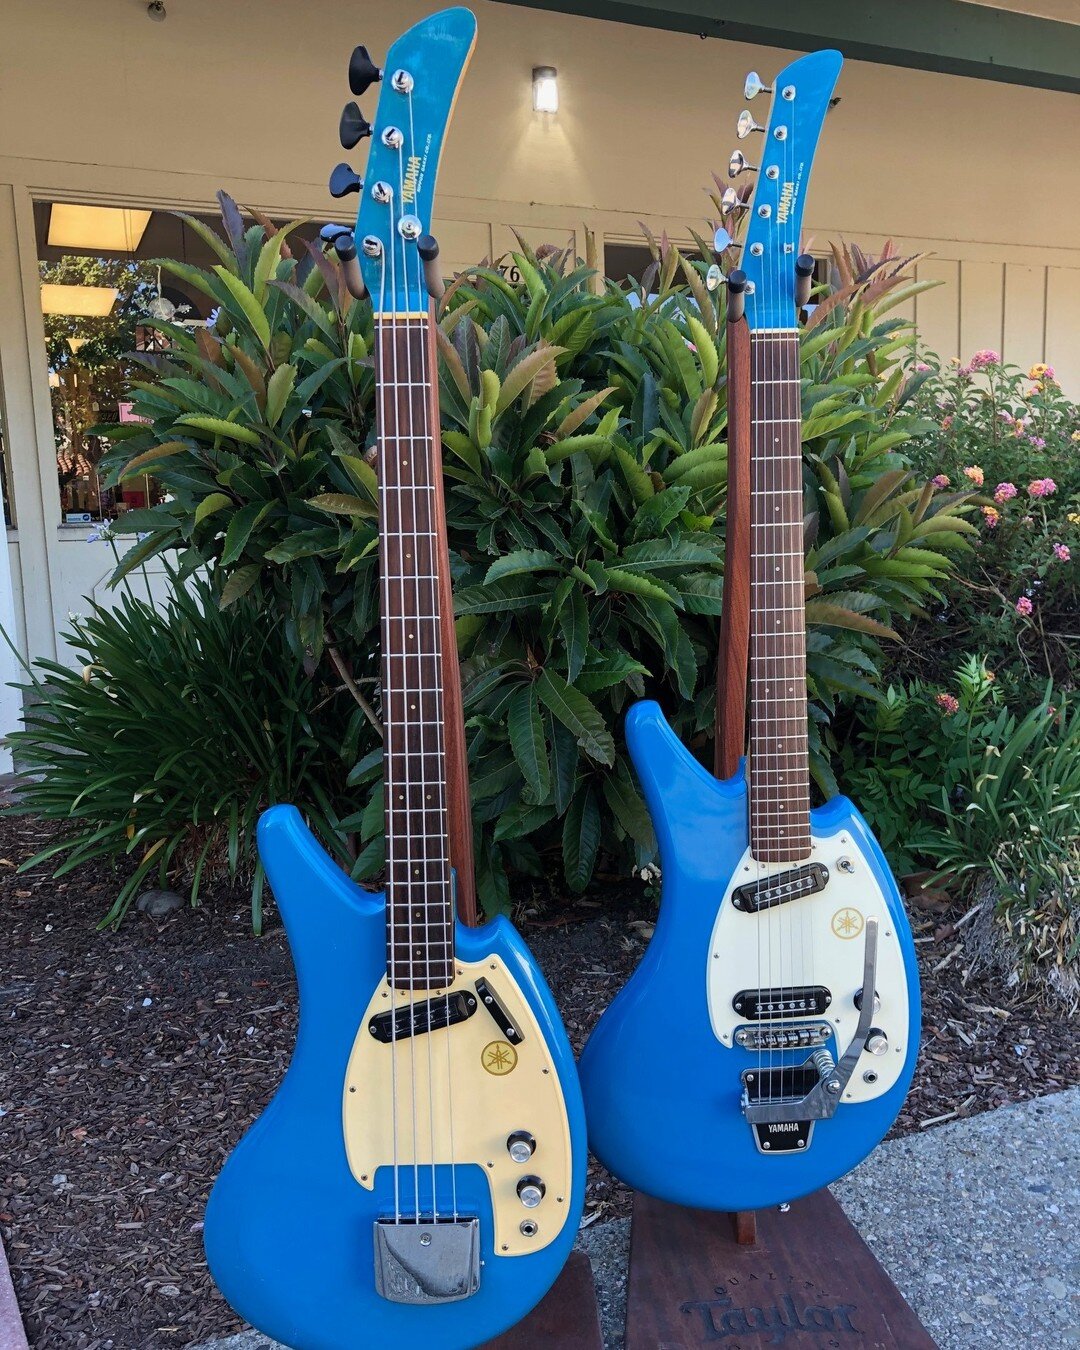 What the heck is it Wednesday?!

These super cool, retro @yamahamusicusa instruments were in our repair shop the other day for some TLC. What do you think was the inspiration for this design? What would YOU call these models?? 

Comment below and we'